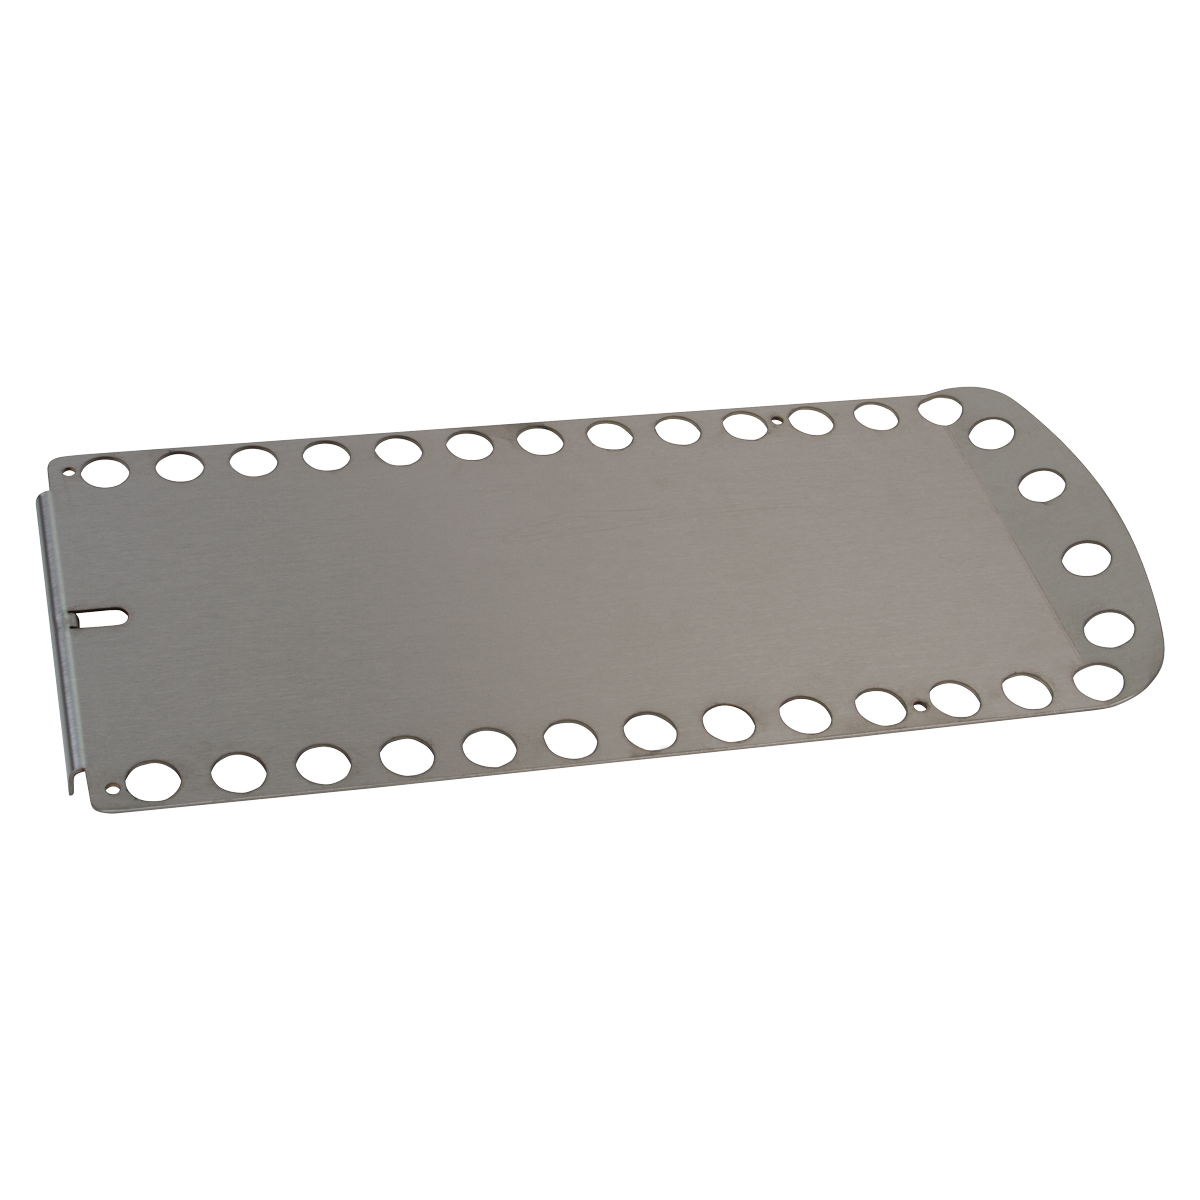 Ultraclave Tray Plate (Midmark)